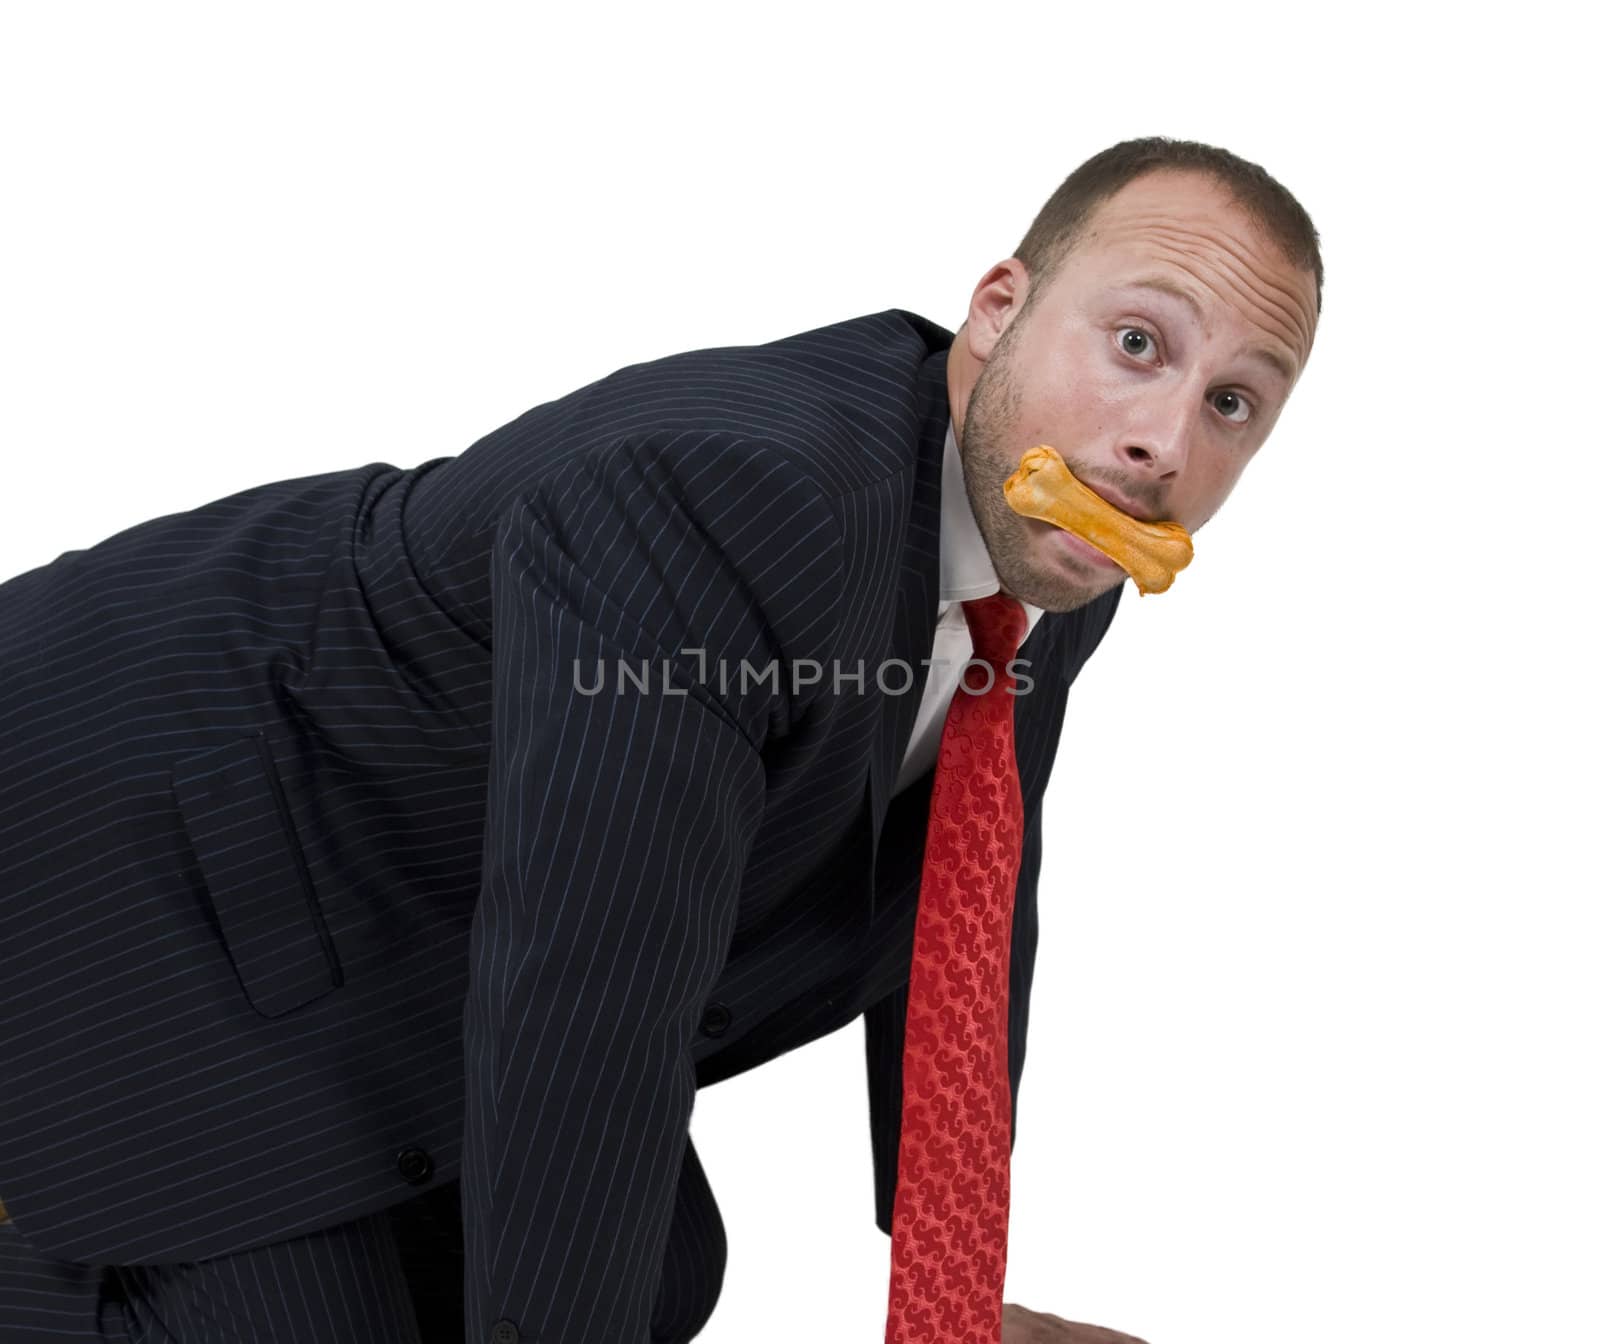 man with dog-biscuit on isolated background

